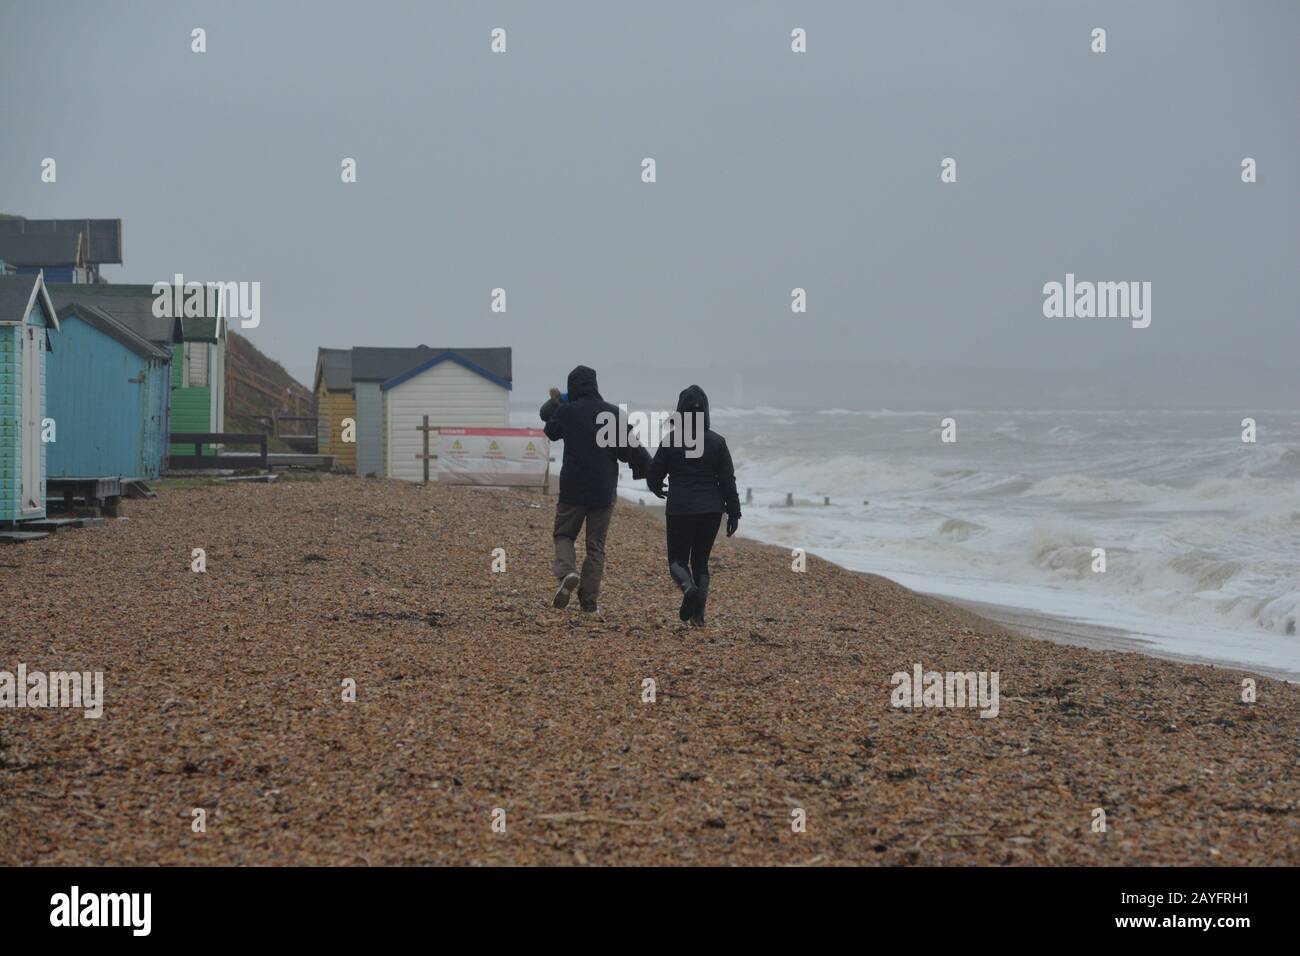 Storm Dennis, classified as a bomb cyclone, brings gale force winds and heavy rain to the south coast. The strong wind whips up the sea into huge waves. Couple walking on the beach in the windy weather, Milford-on-Sea, Hampshire, England, UK, 15th February 2020. Stock Photo